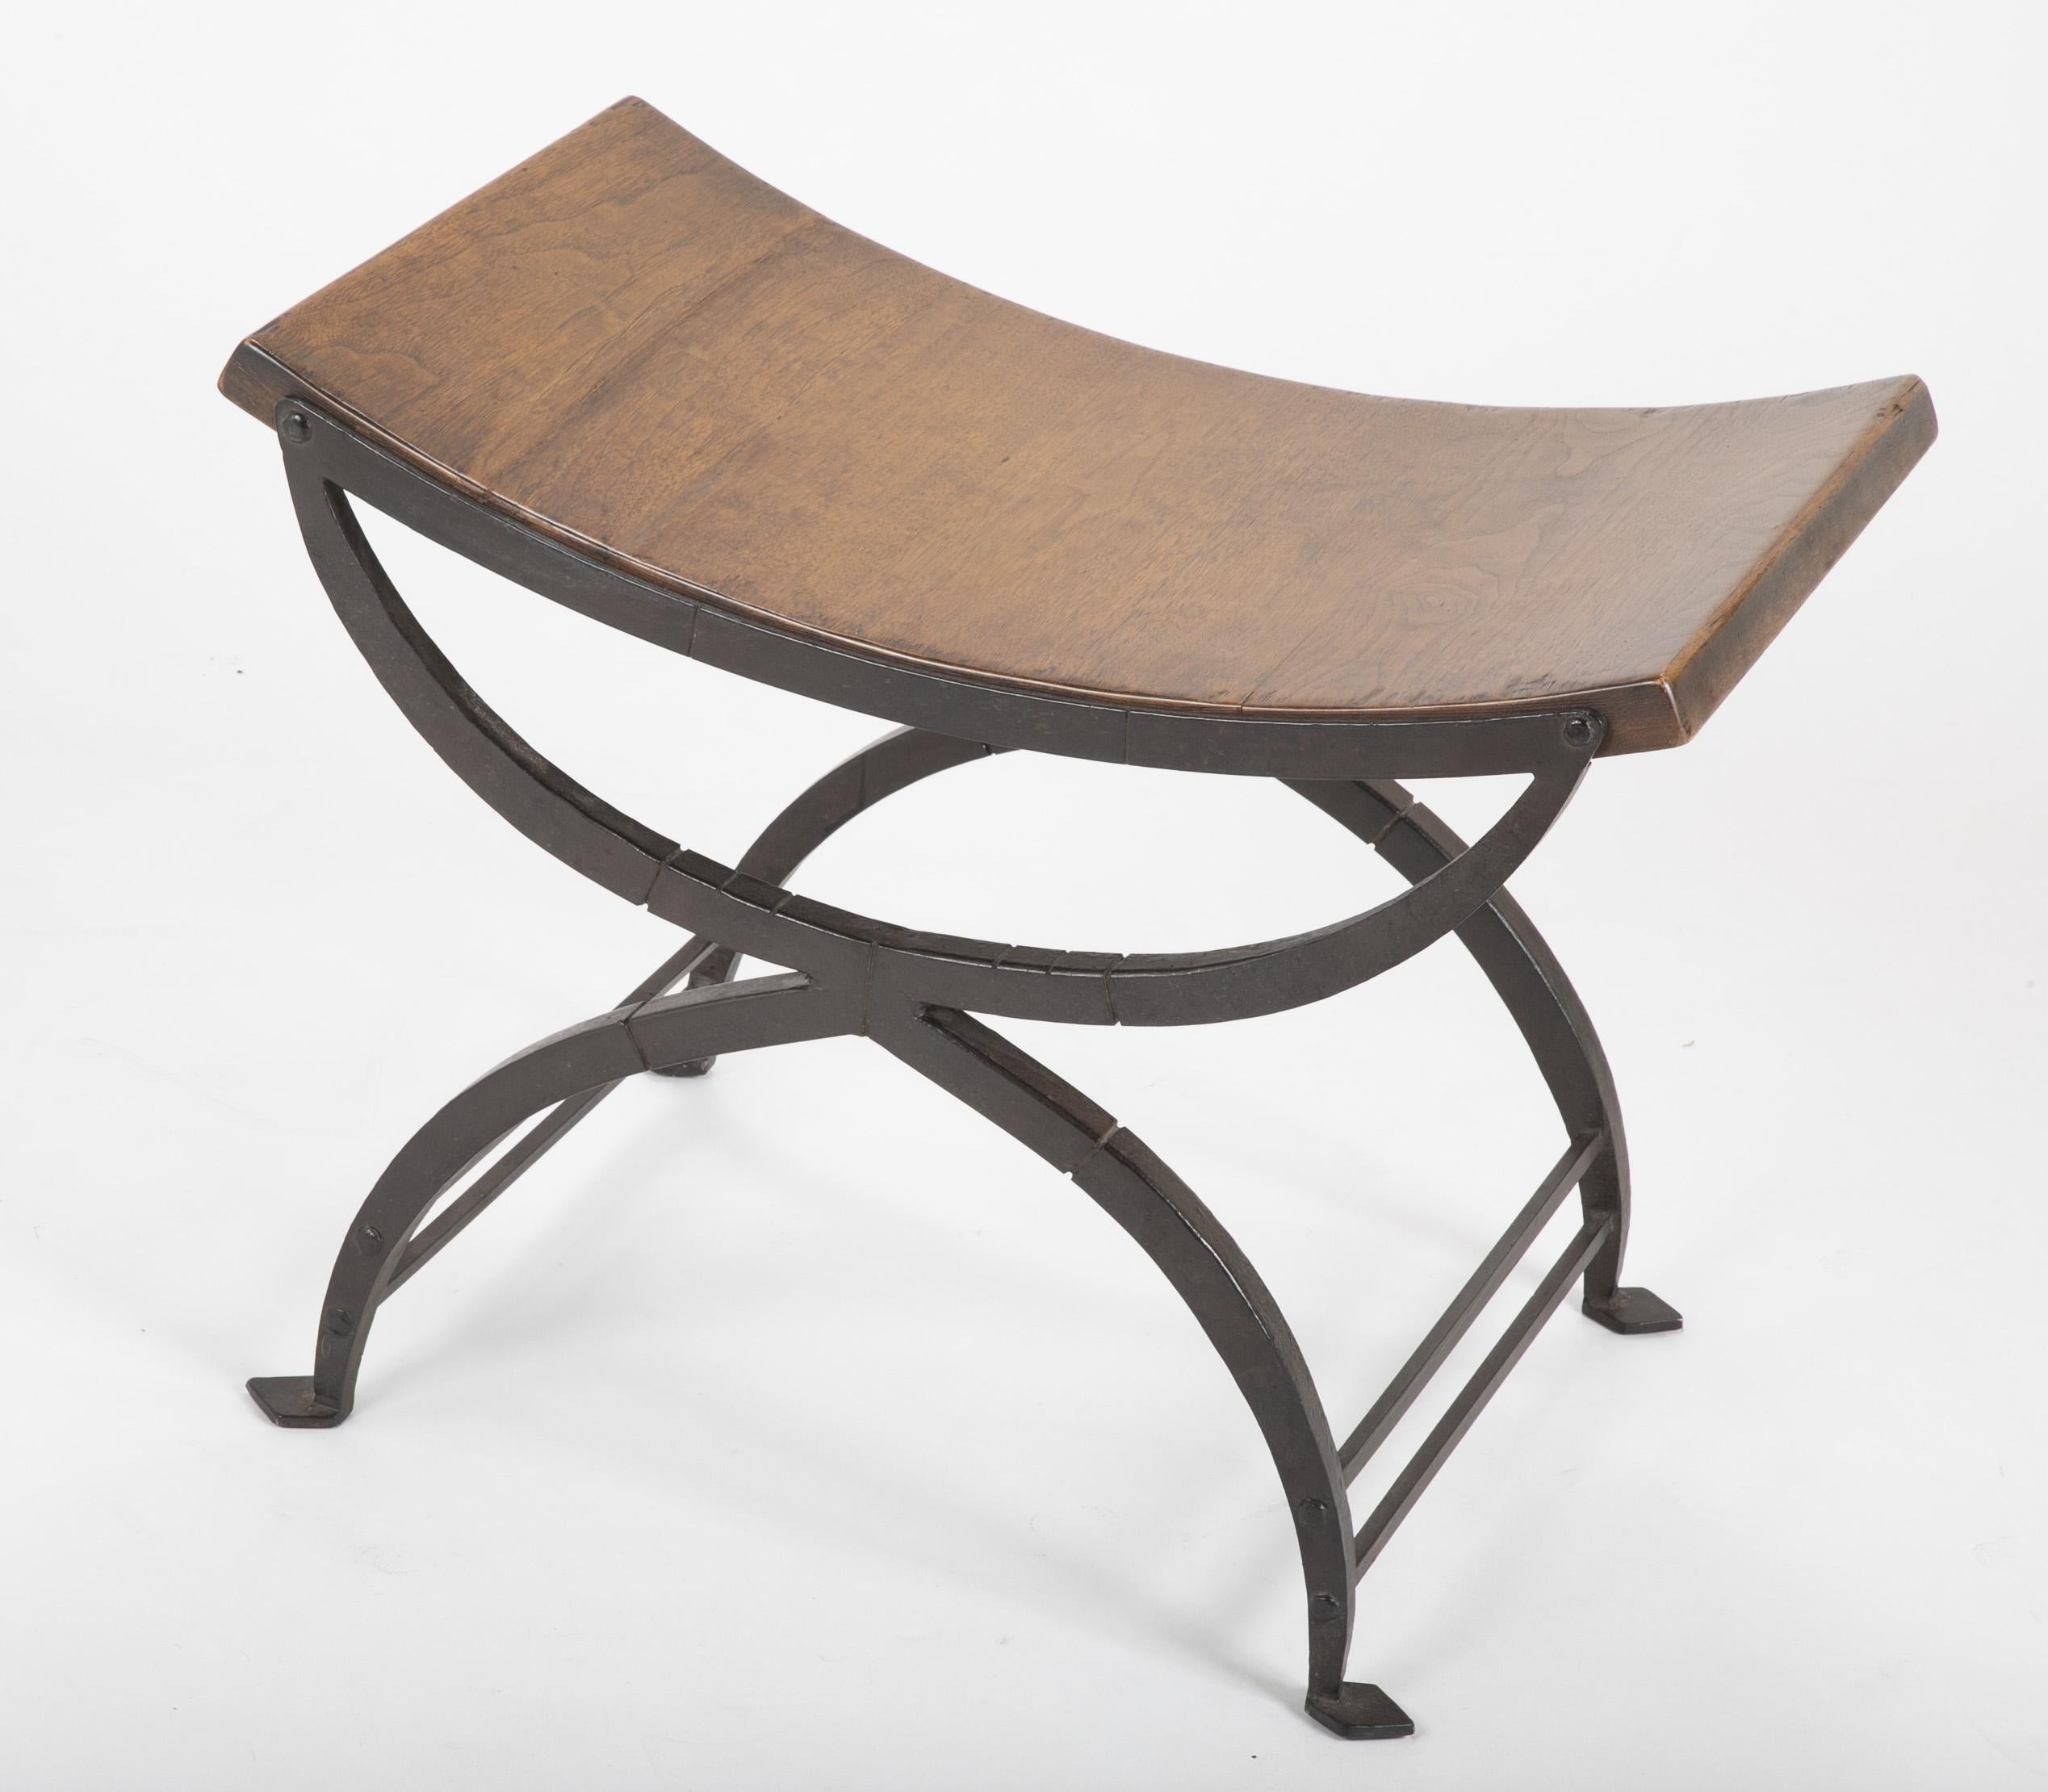 Handwrought iron stool with polished oak seat attributed to Morgan Colt of New Hope, Pennsylvania. A handsome piece, great for an entryway, the foot of a bed or any room in need of distinctive seating. 

Morgan Colt (1876-1926) was one of the most